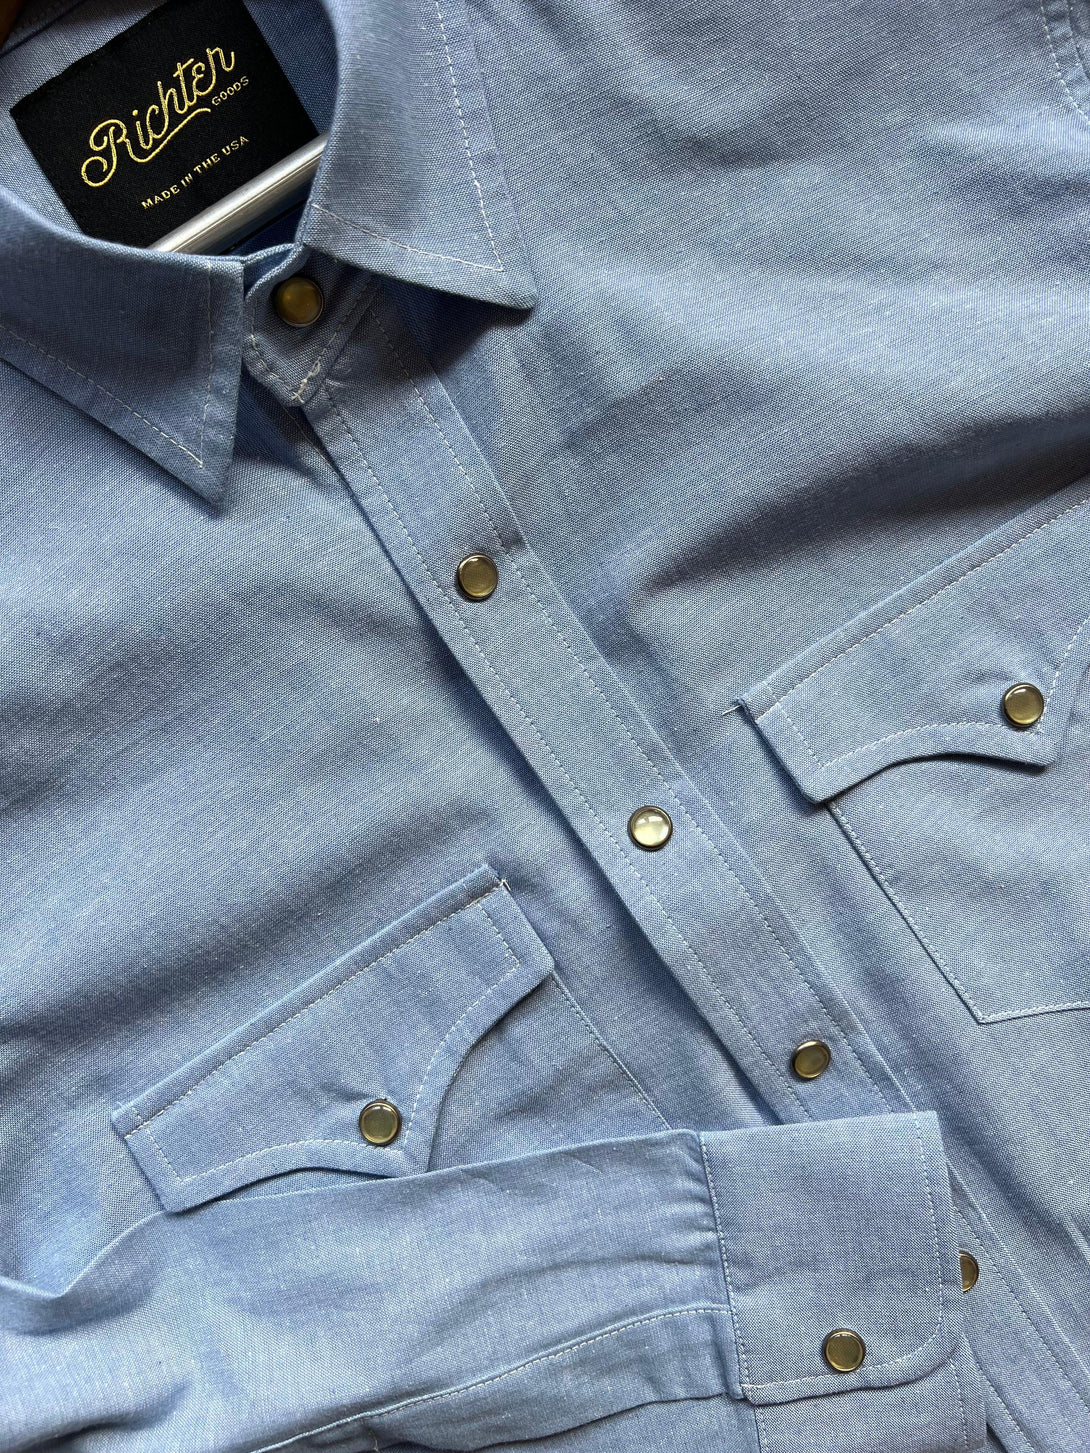 Pecos Pearl Snap in Chambray Richter Goods | Made by us in the U.S.